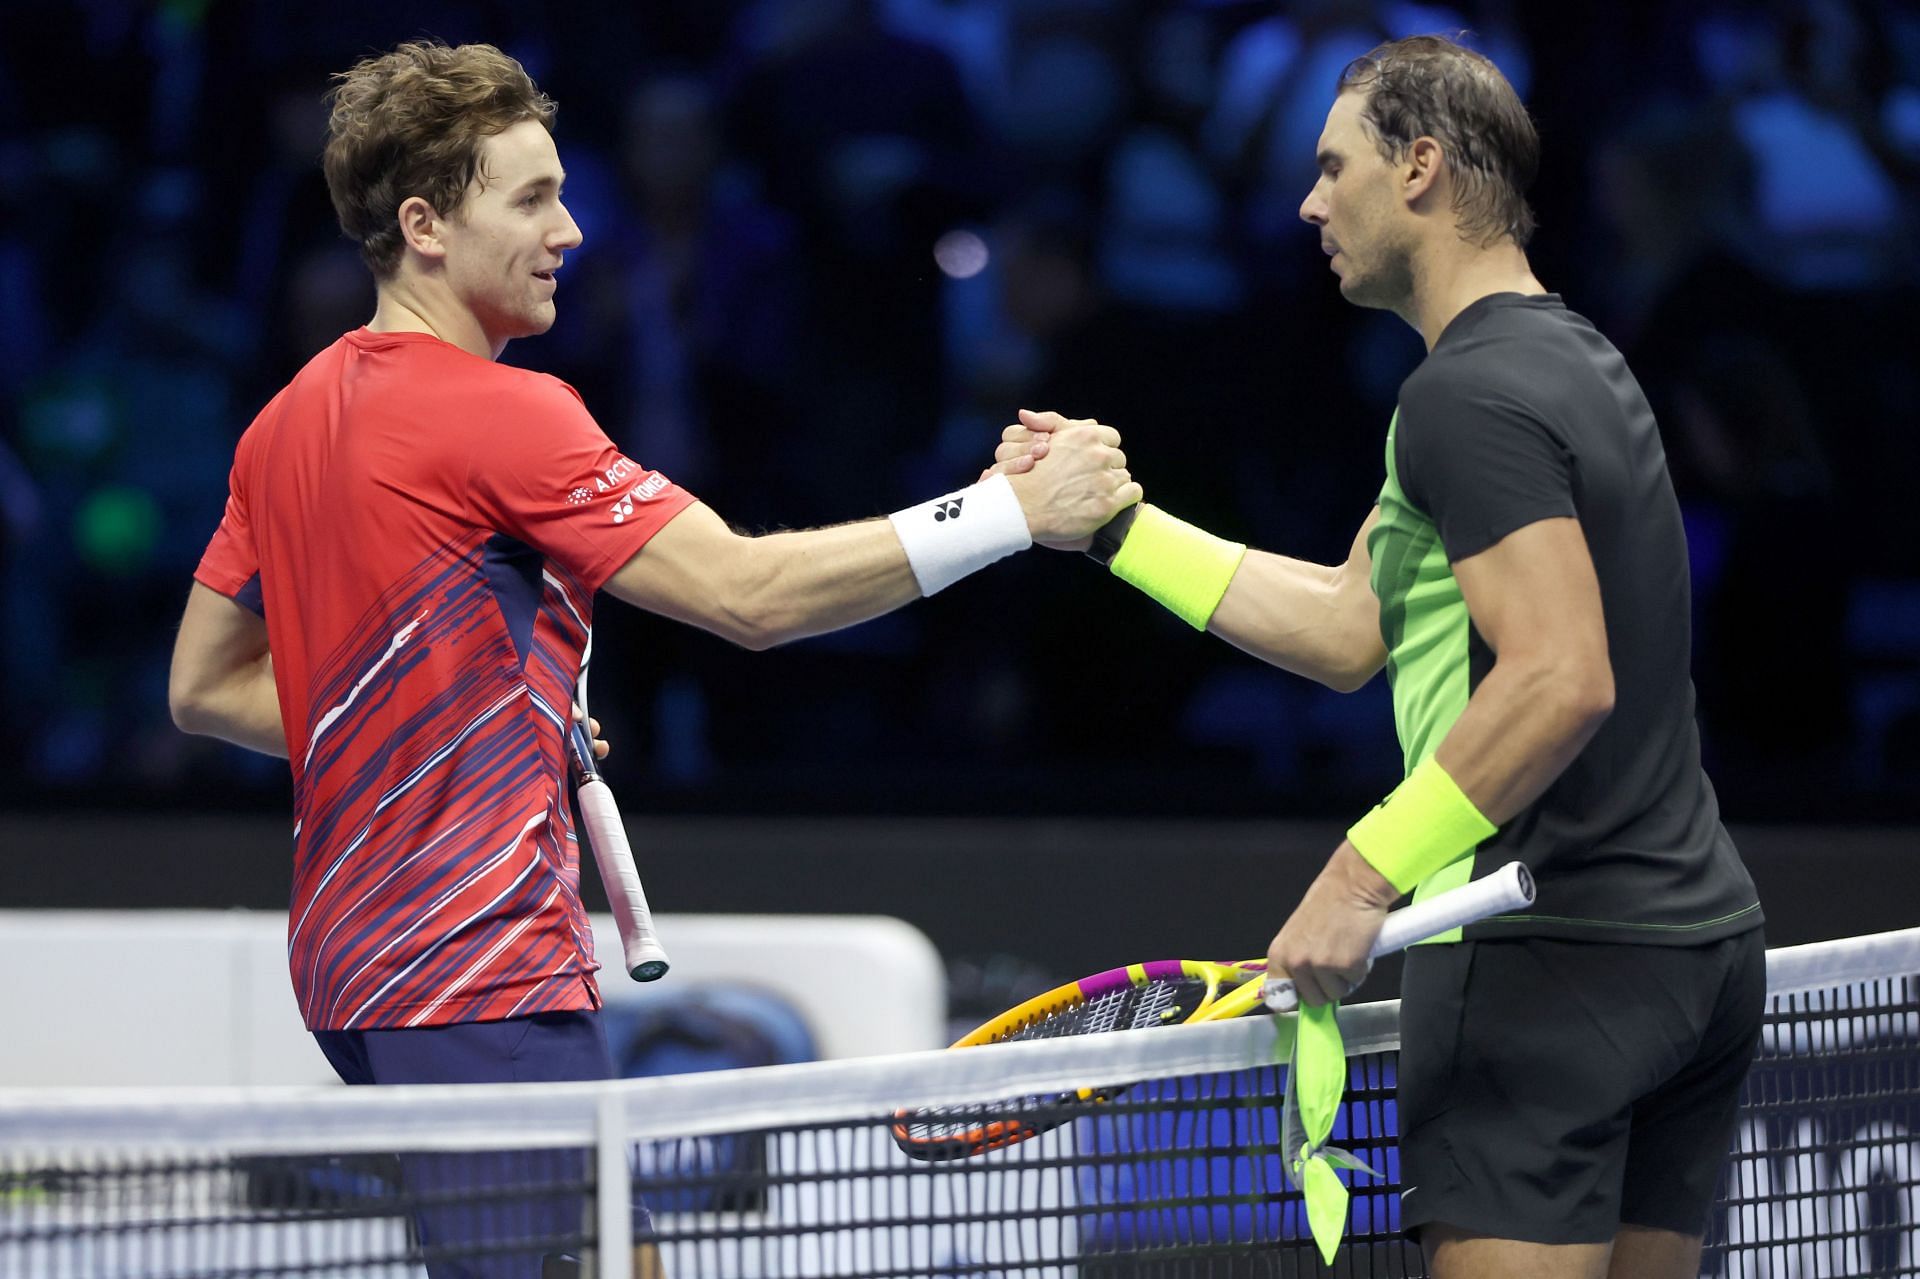 Casper Ruud and Rafael Nadal pictured at the 2022 Nitto ATP Finals.